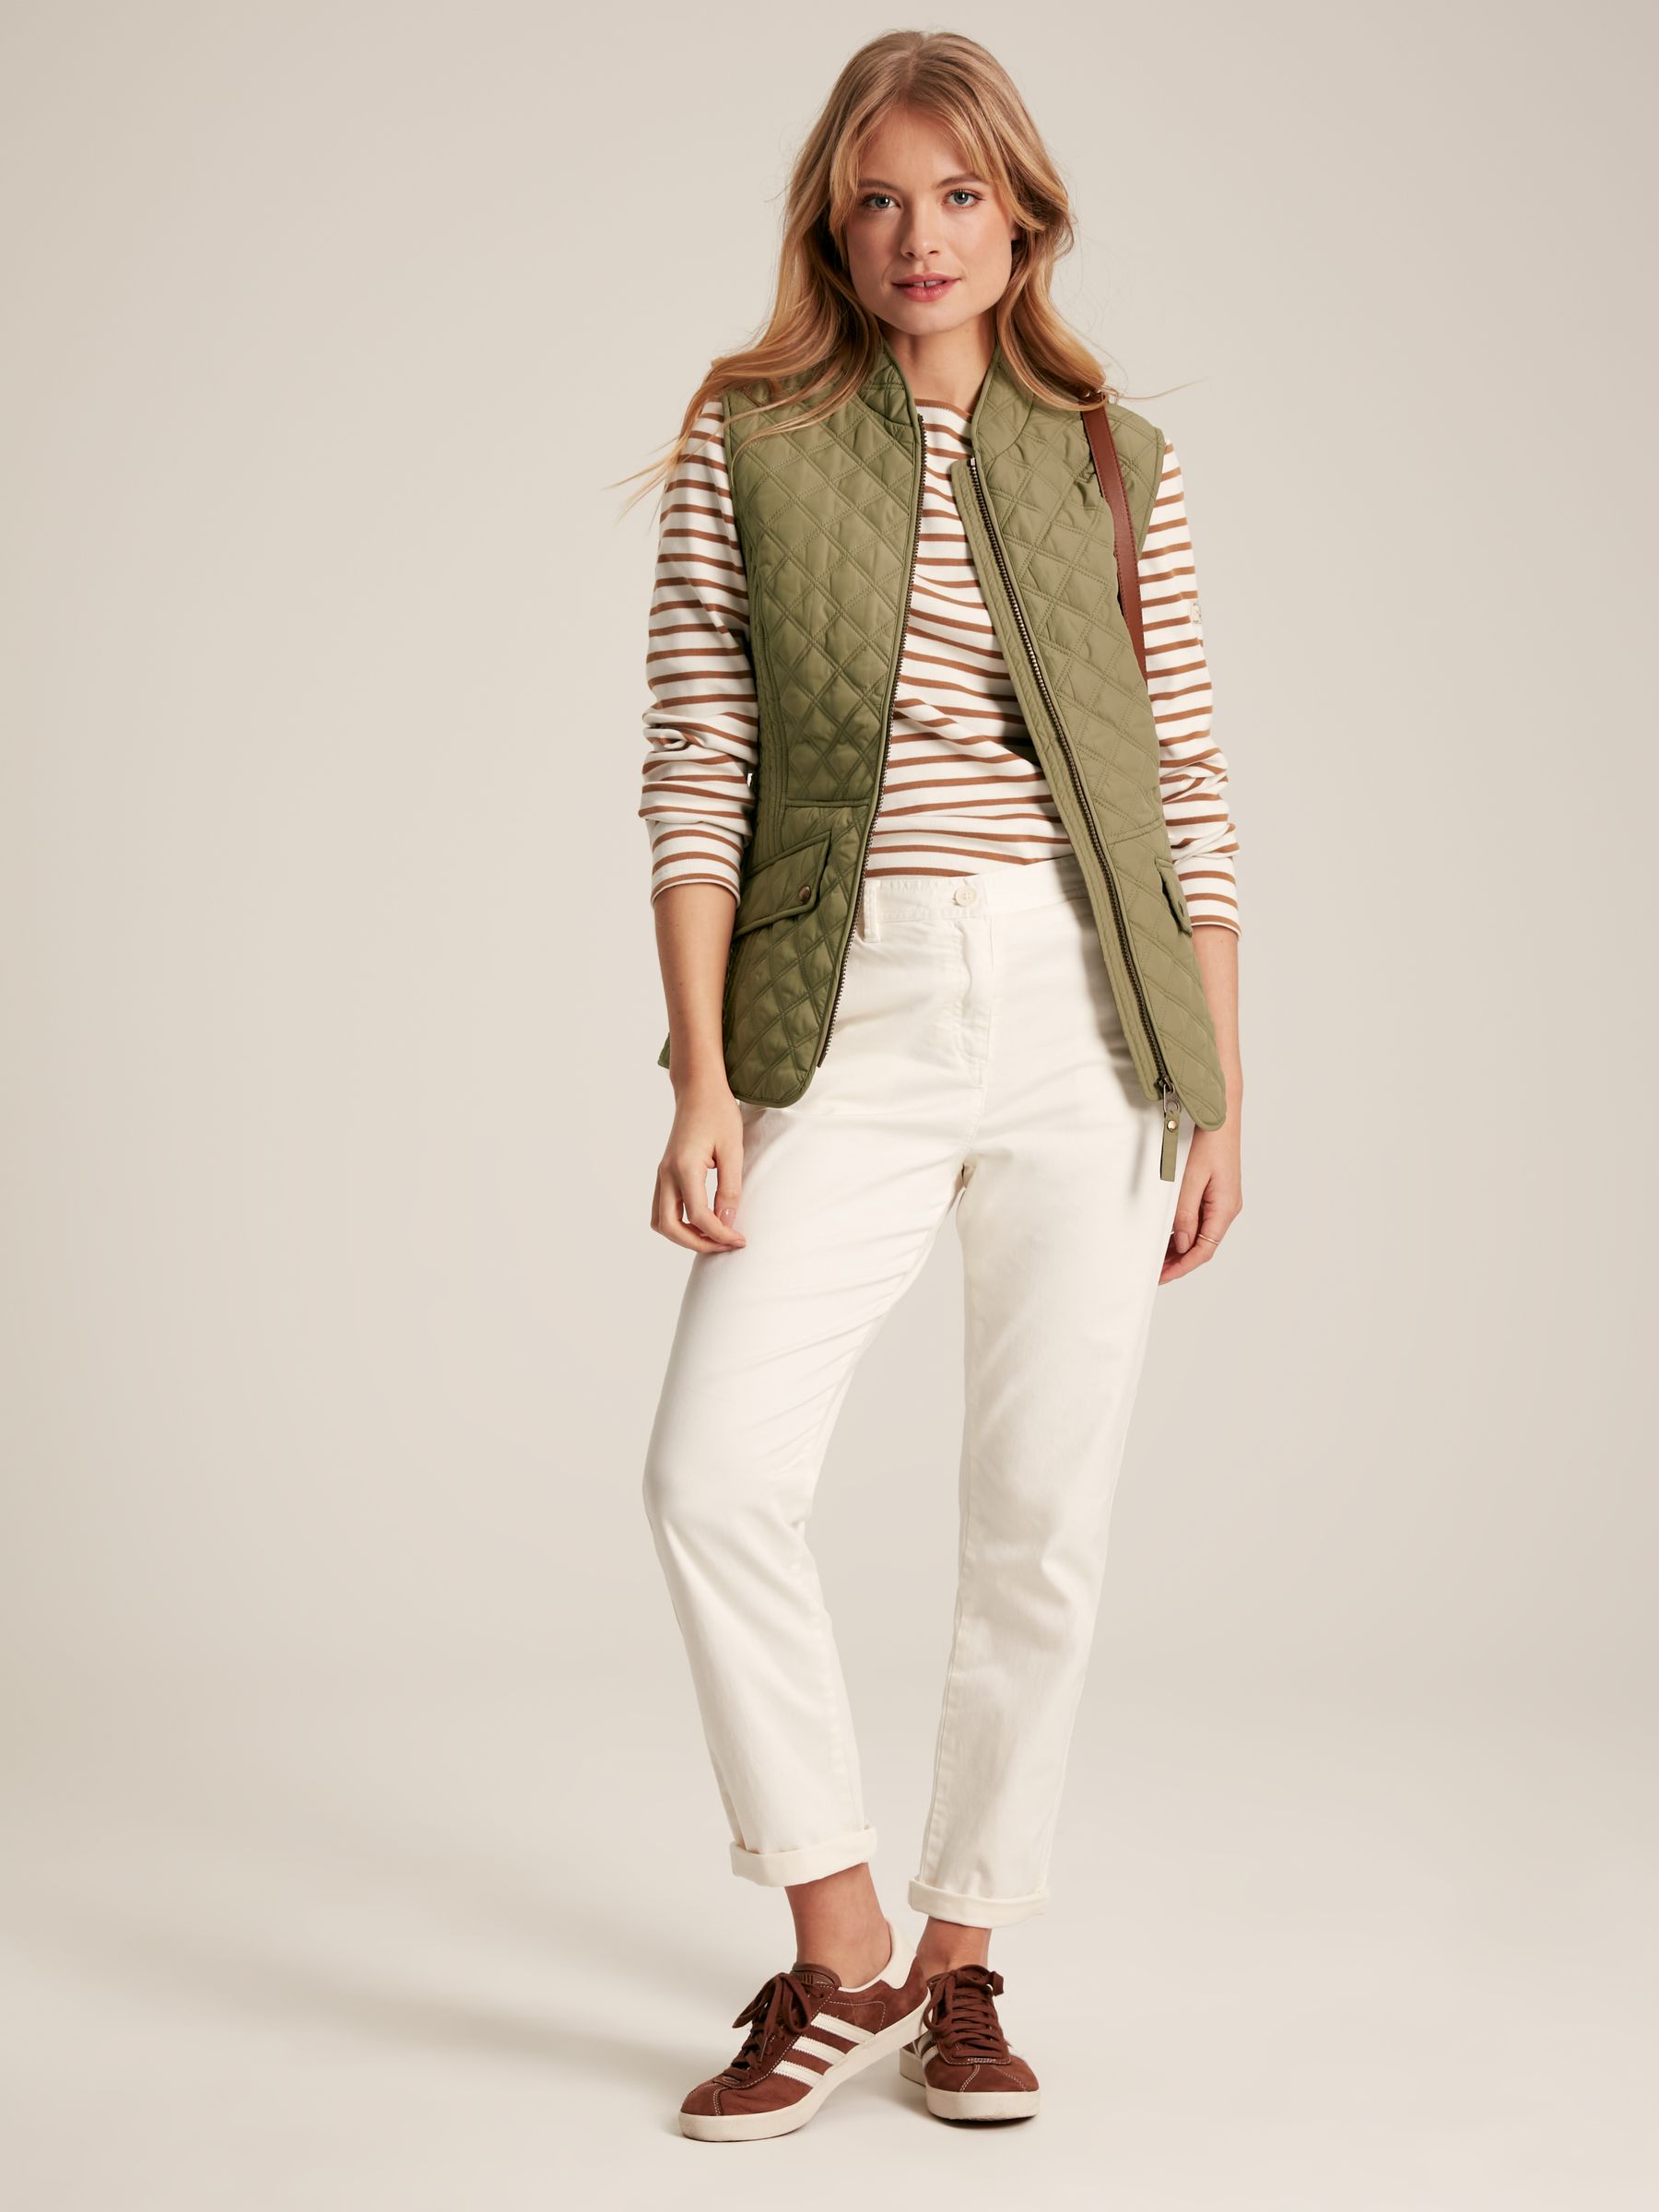 Buy Minx Green Showerproof Diamond Quilted Gilet from the Joules online ...